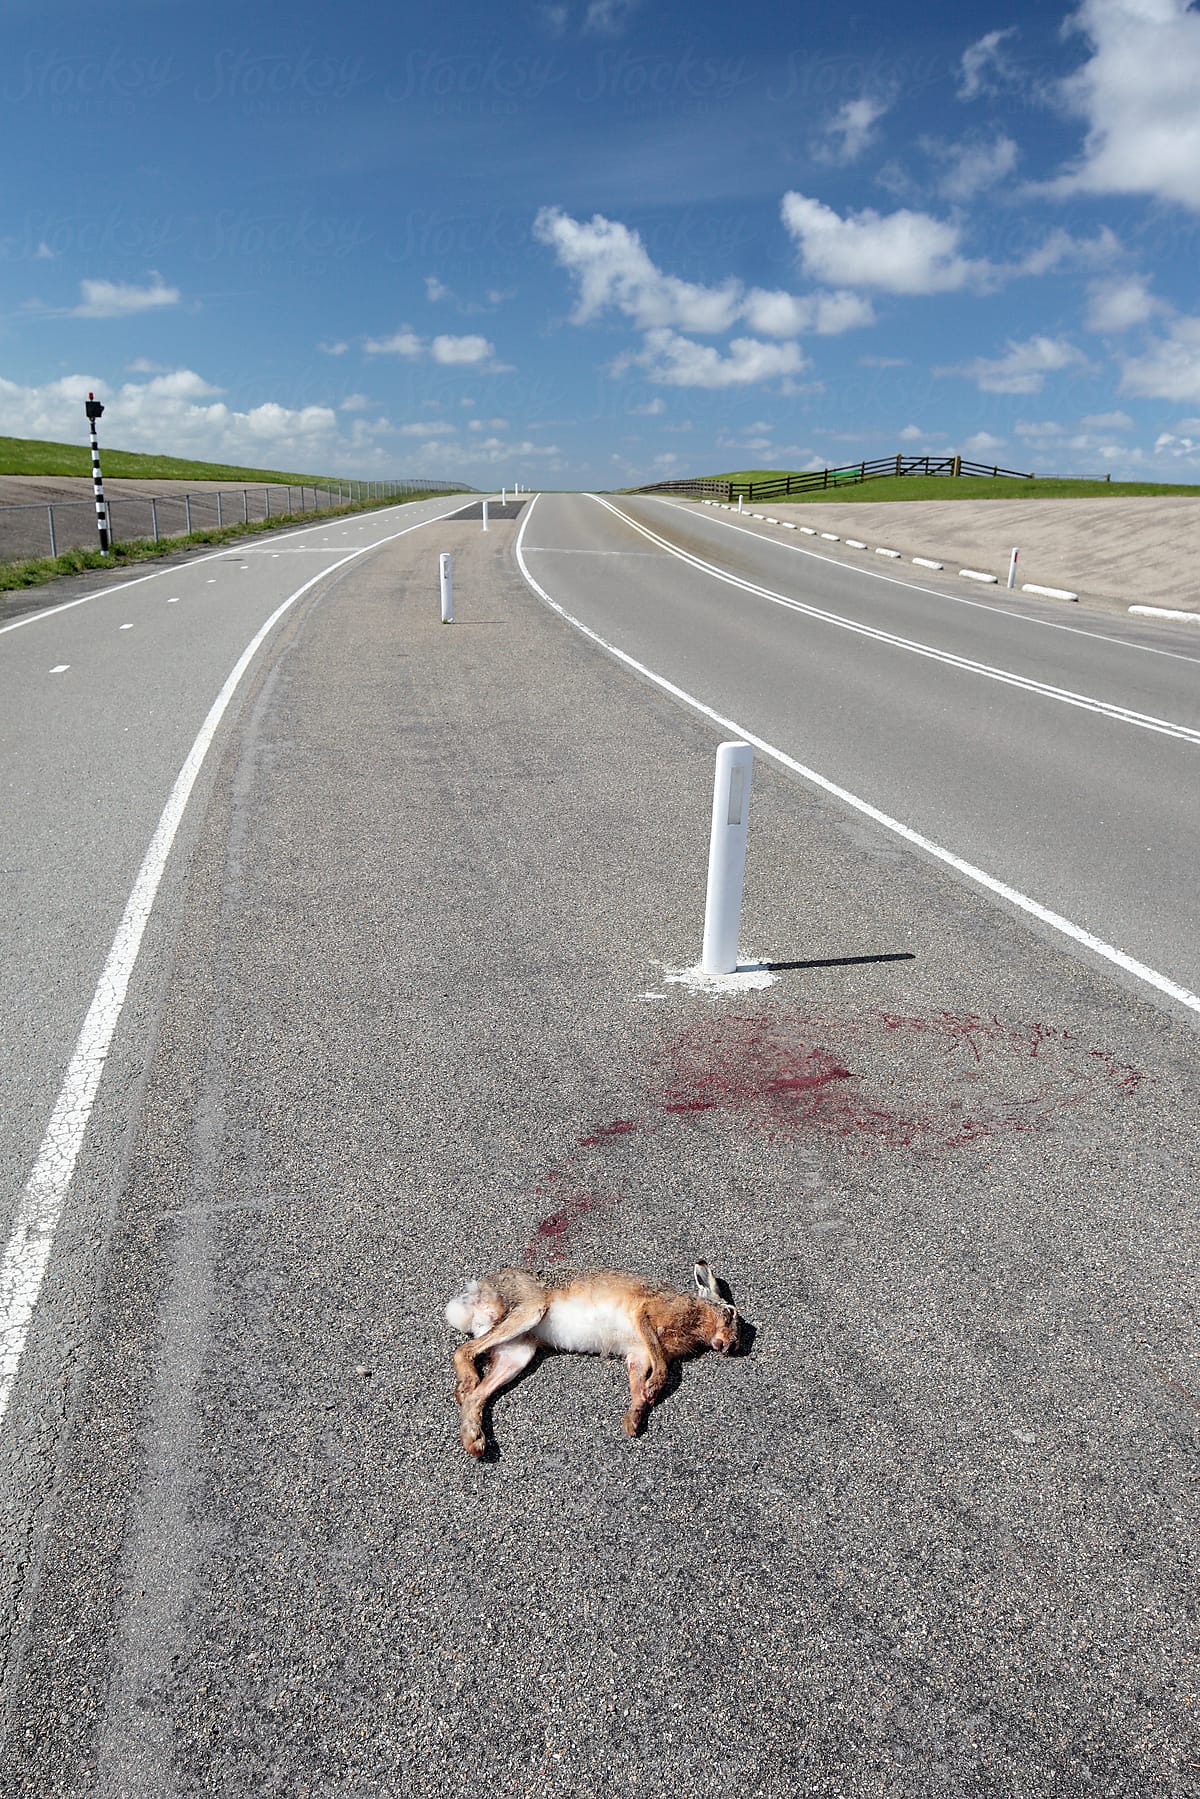 Dead hare on the road